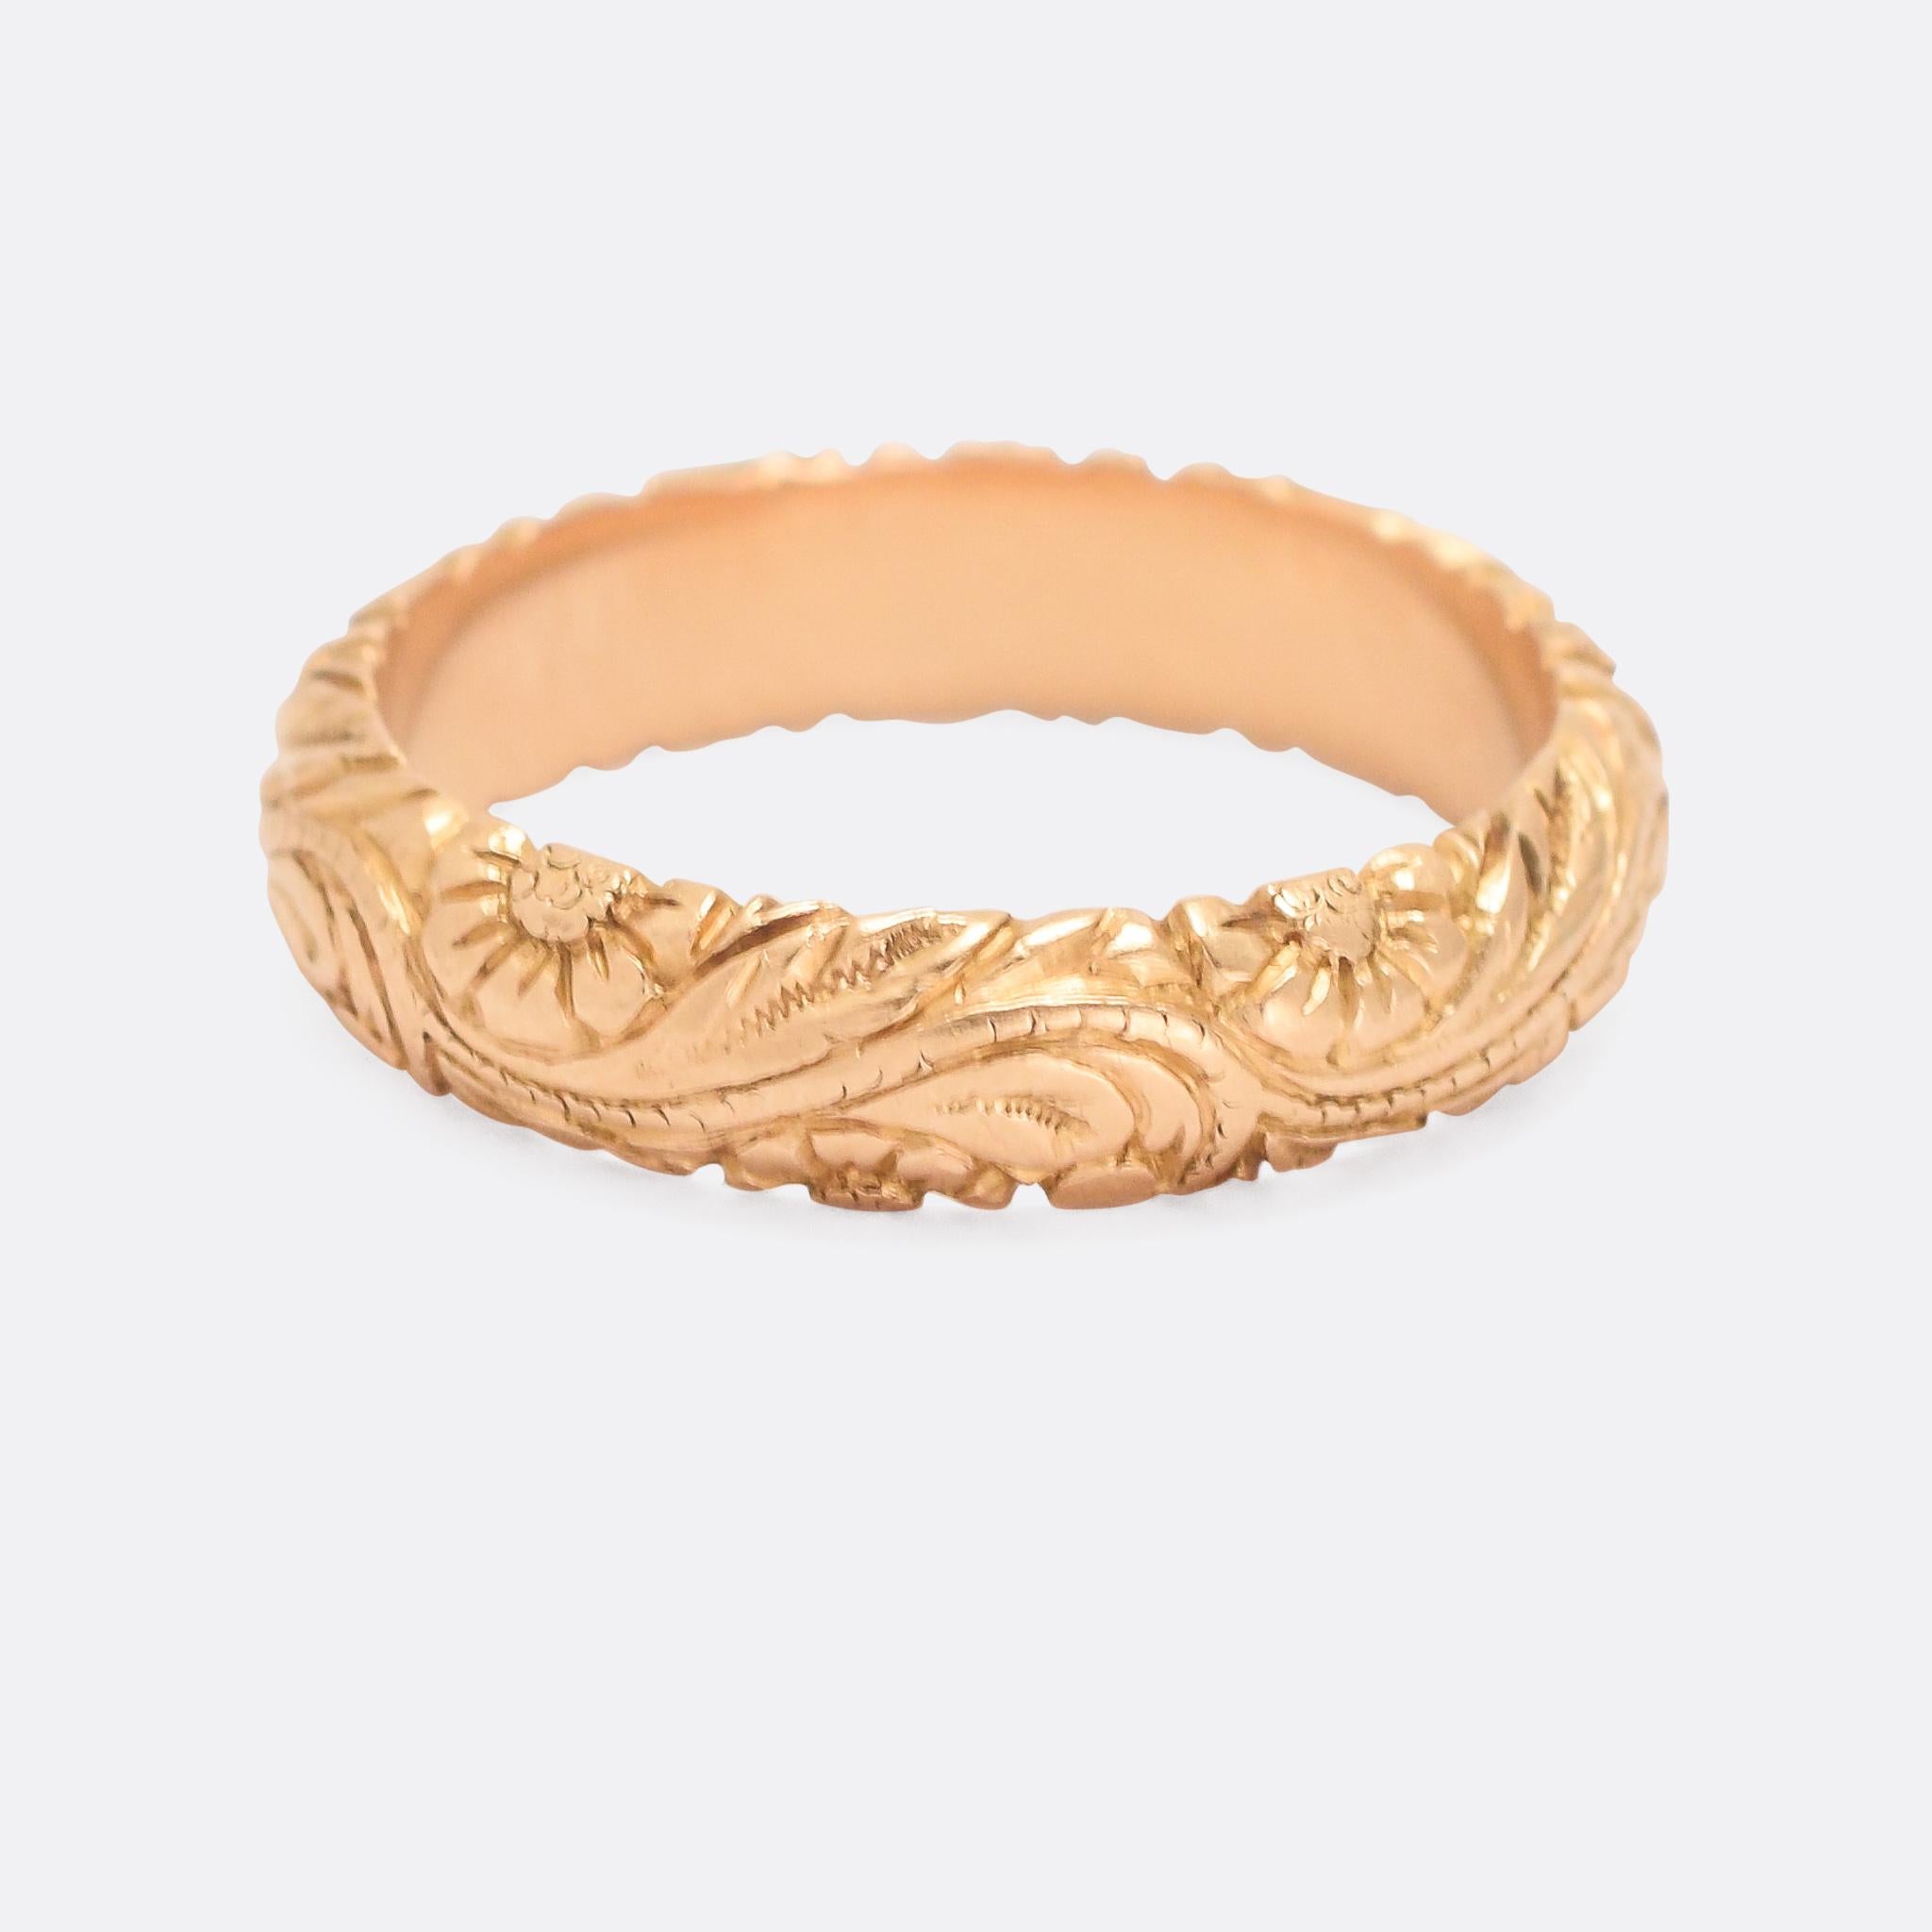 A stunning 18th Century gold band adorned with deeply chased rose motifs. It's crafted in 18 karat gold and dates from the 1750s; the quality is particularly good, and it has a substantial feel at 10.5g in weight. The carving is well executed and